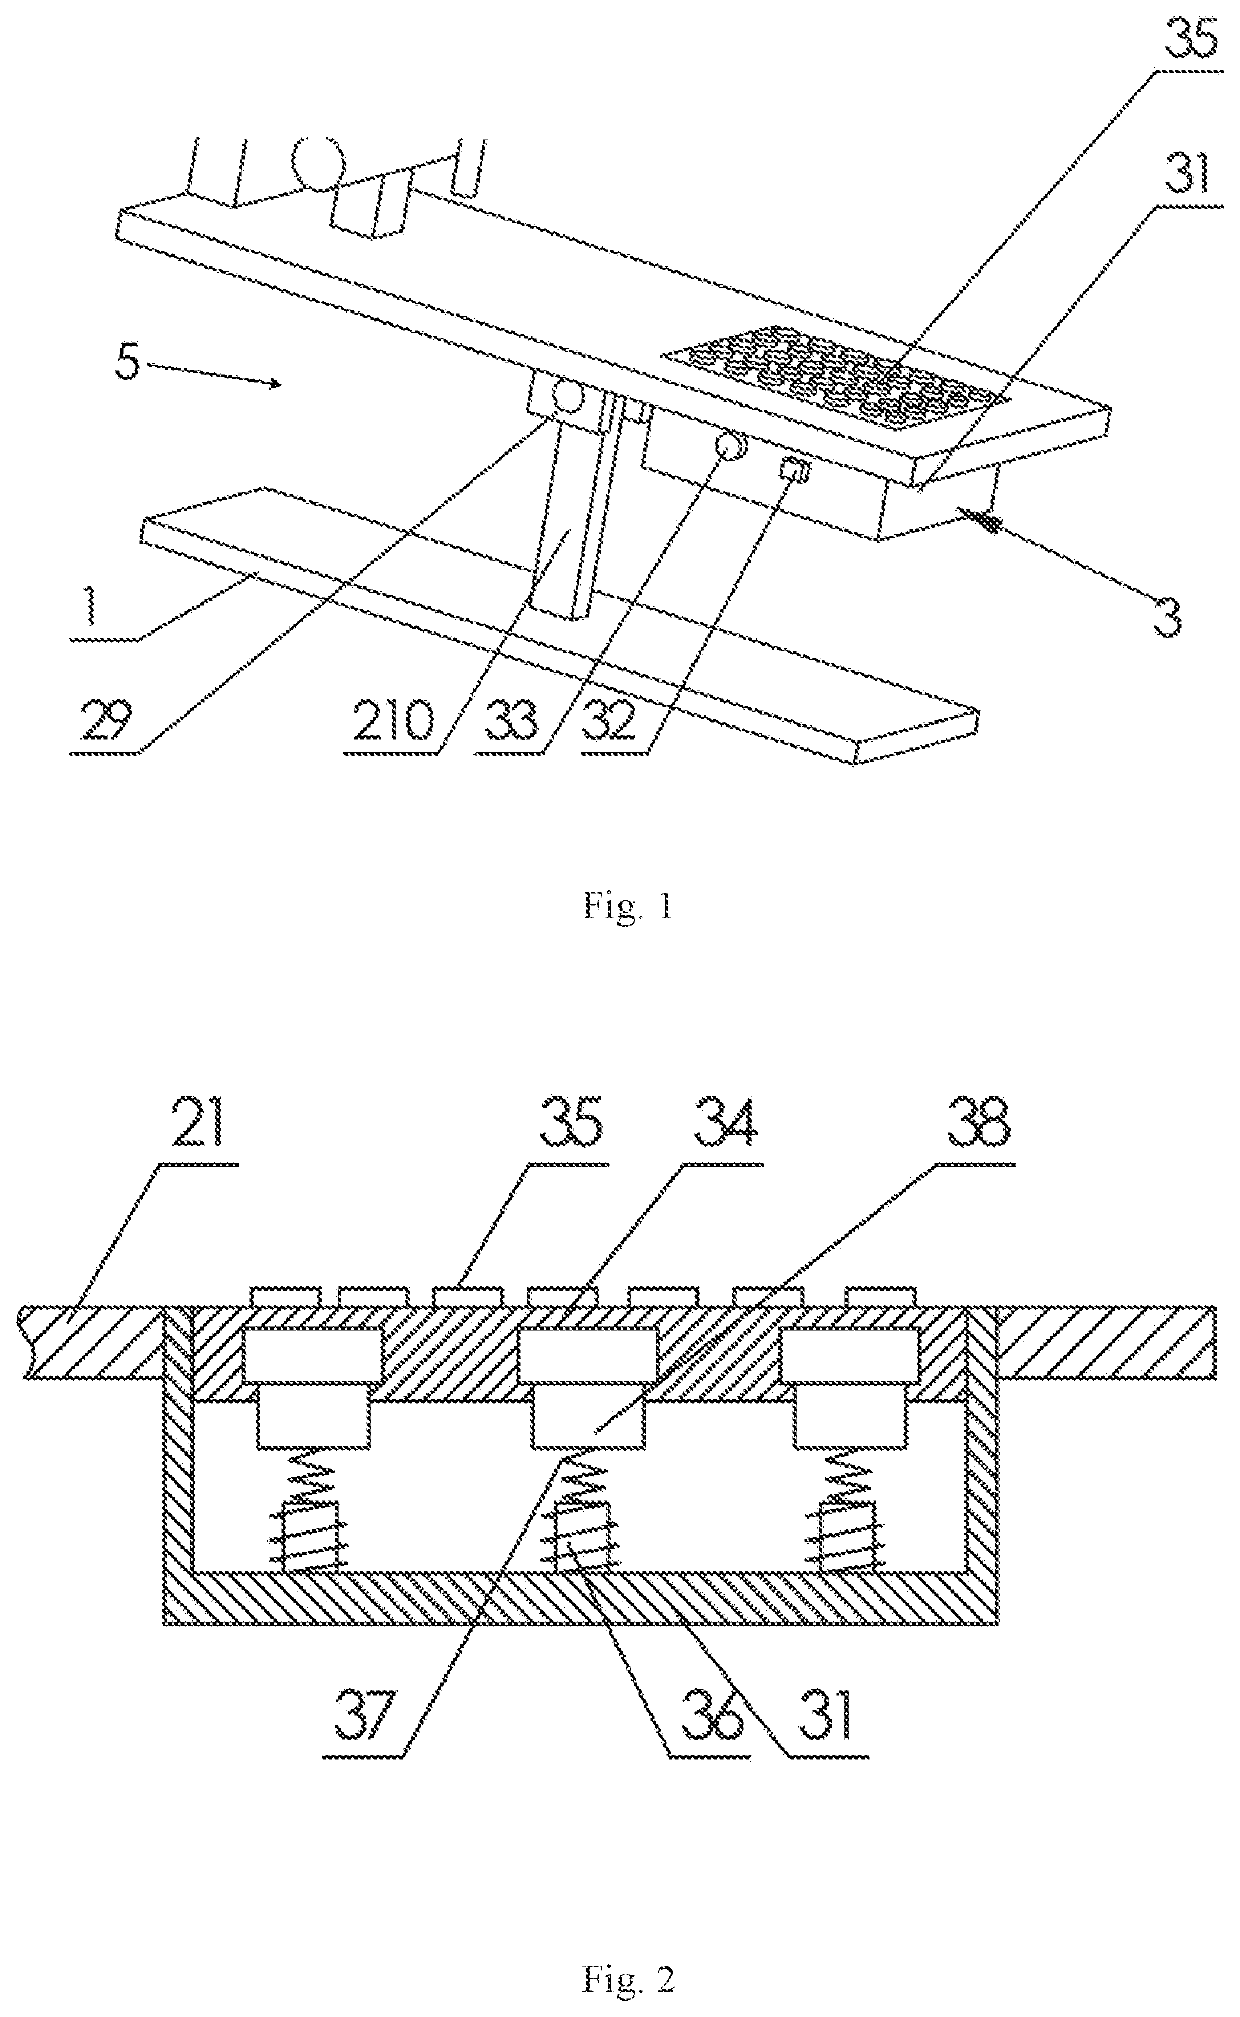 Sports massage device for relieving muscle soreness after exercising and exercise apparatus